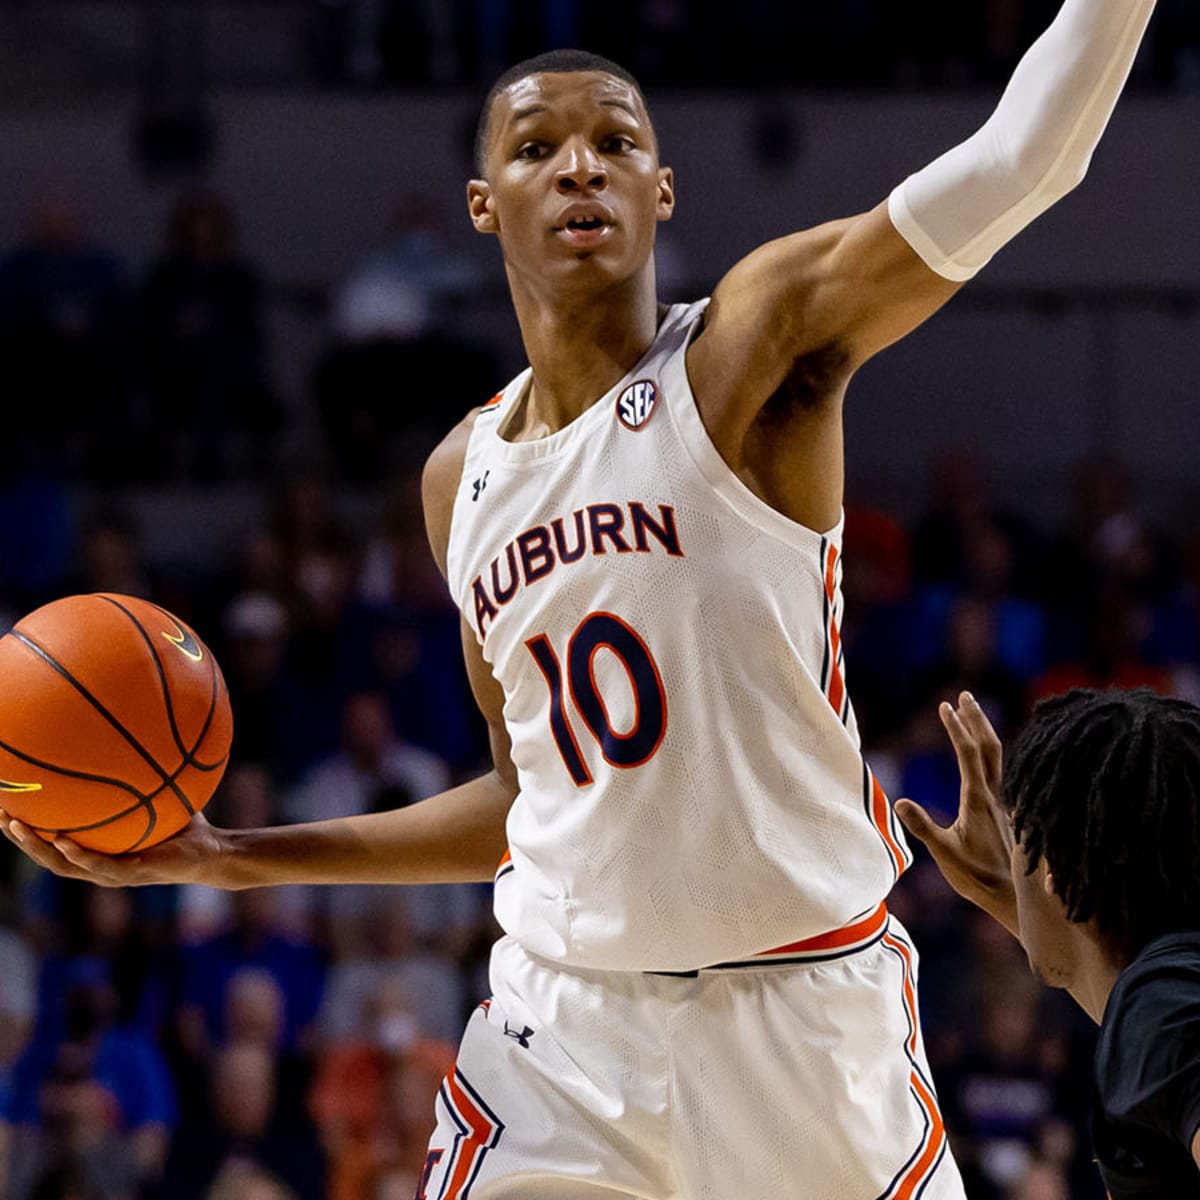 Bennedict Mathurin scouting report: 2022 NBA Draft prospect's strengths,  weaknesses and player comparison